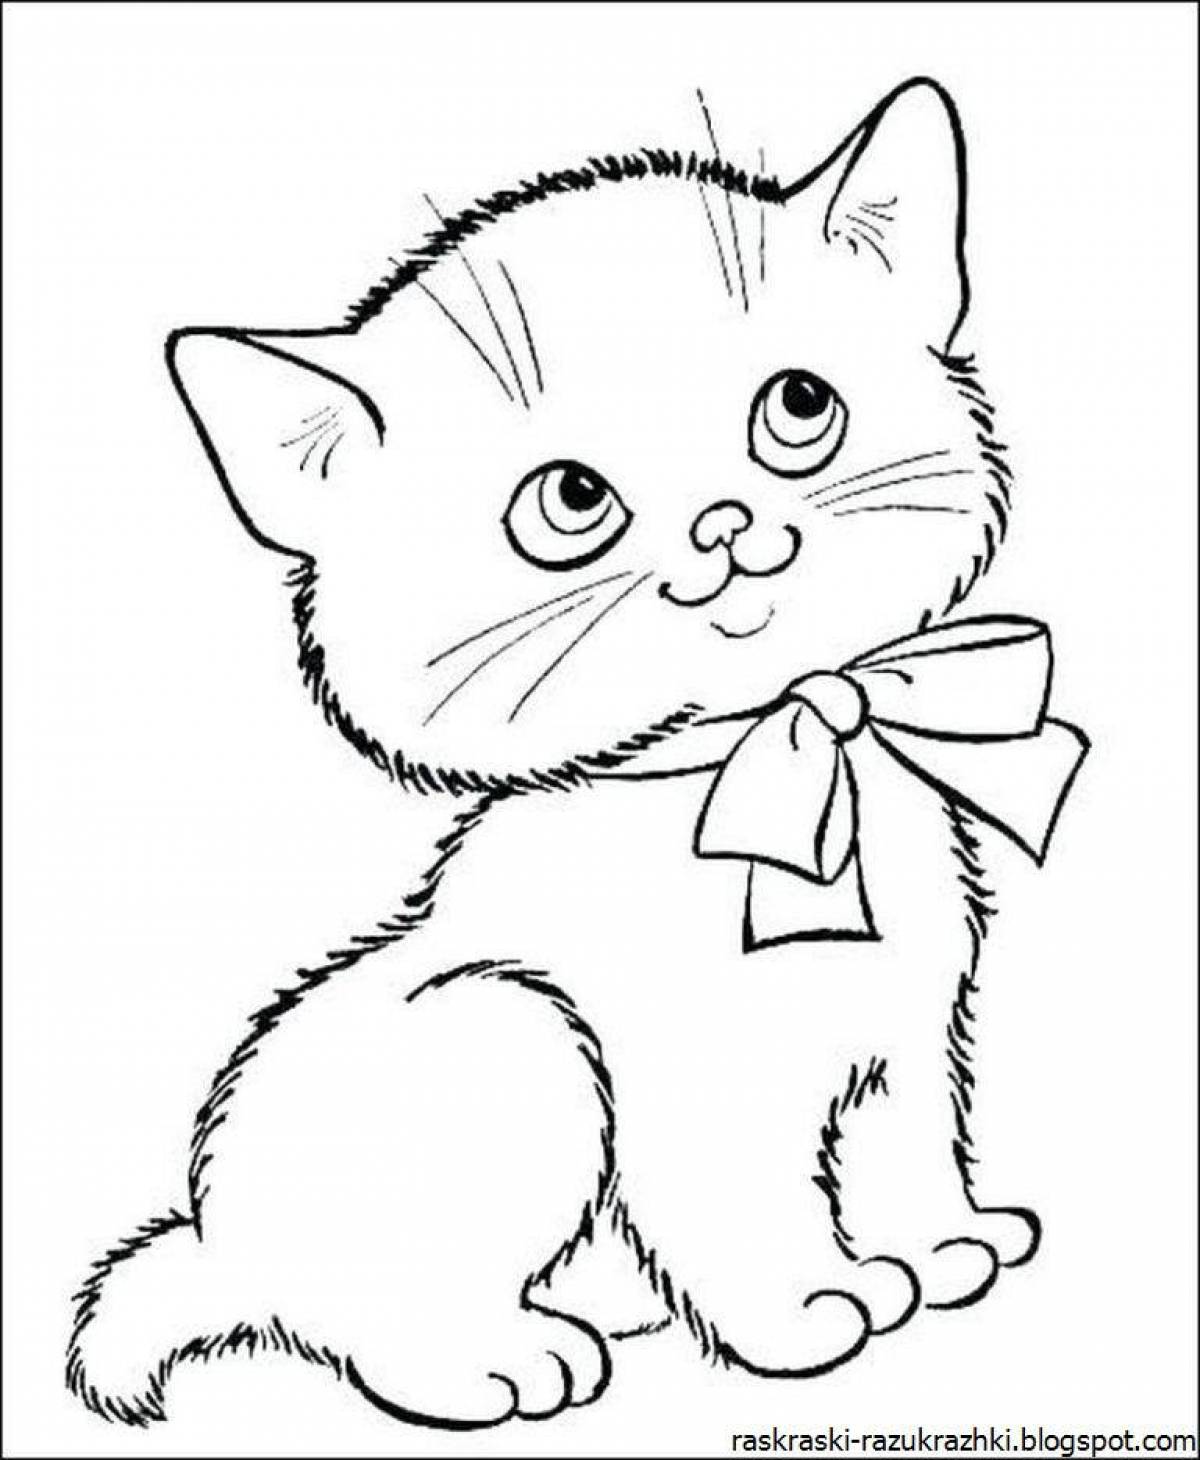 Fairytale kitty coloring book